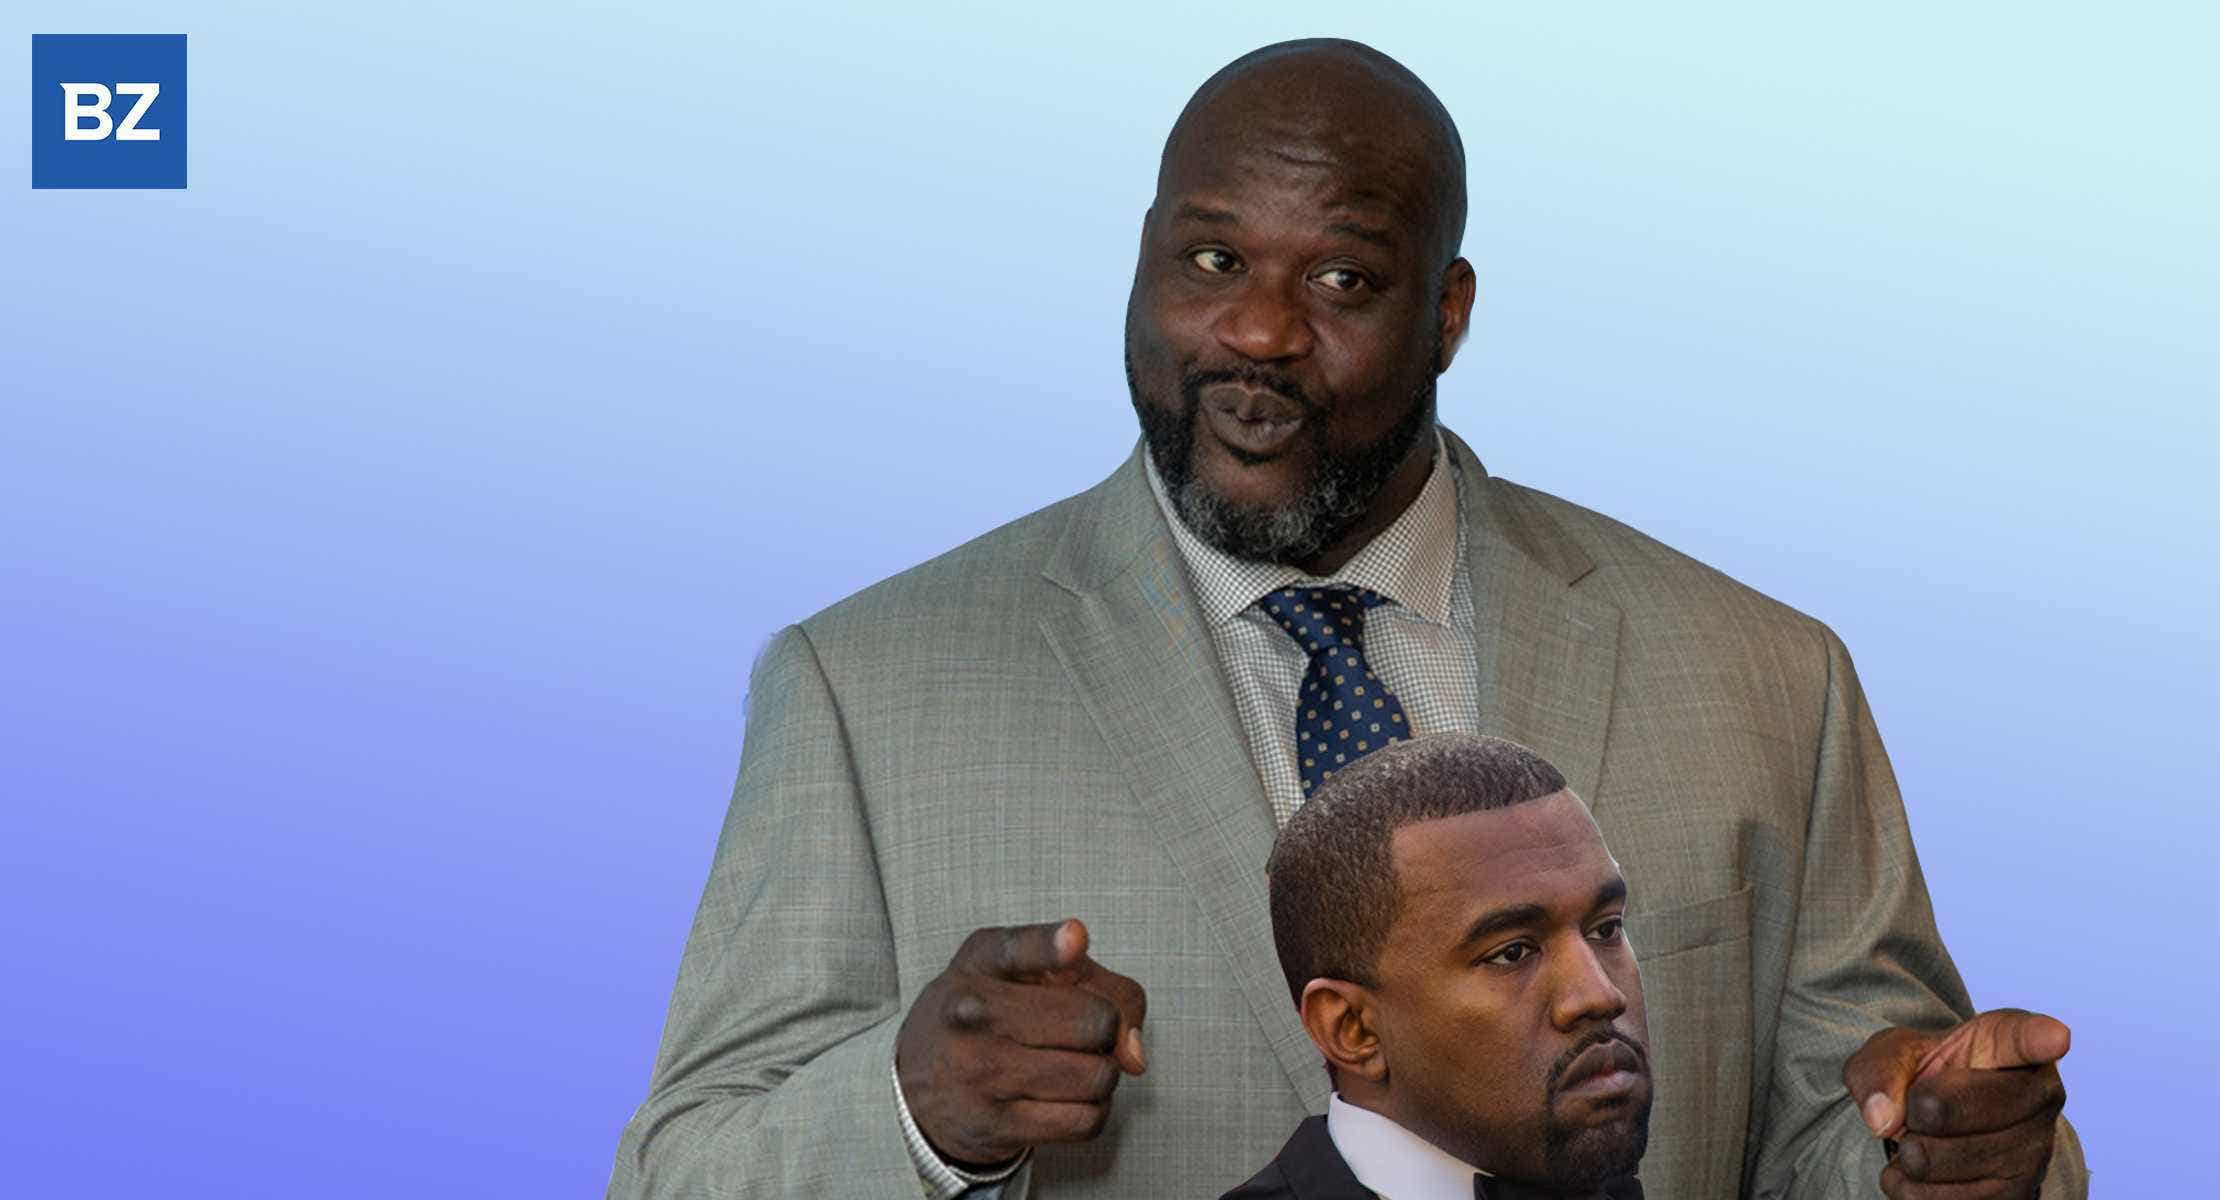 Kanye, Get A Grip! Taking On Shaquille O'Neal's Business Practices Not A Great Idea But What Else Is New?